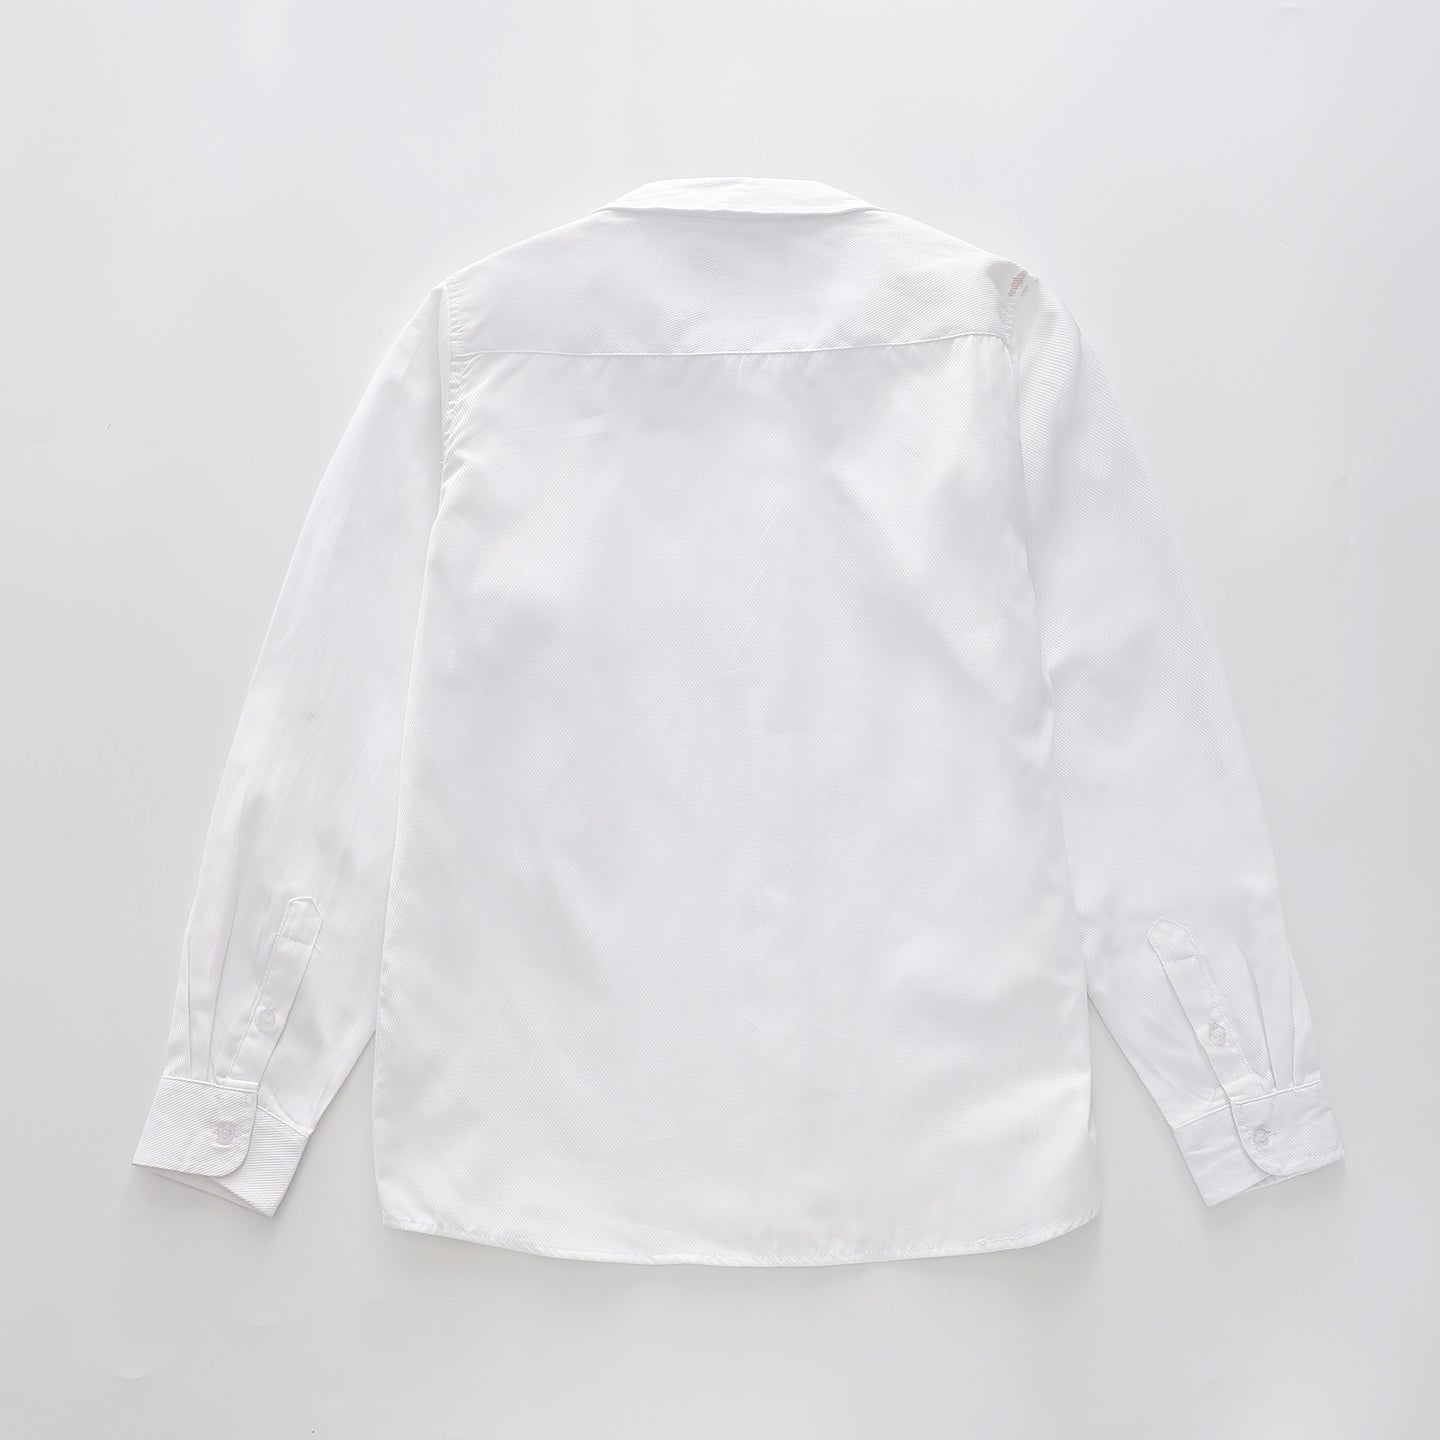 Boys' White Button-Up Dress Shirt size 8 - 13 years